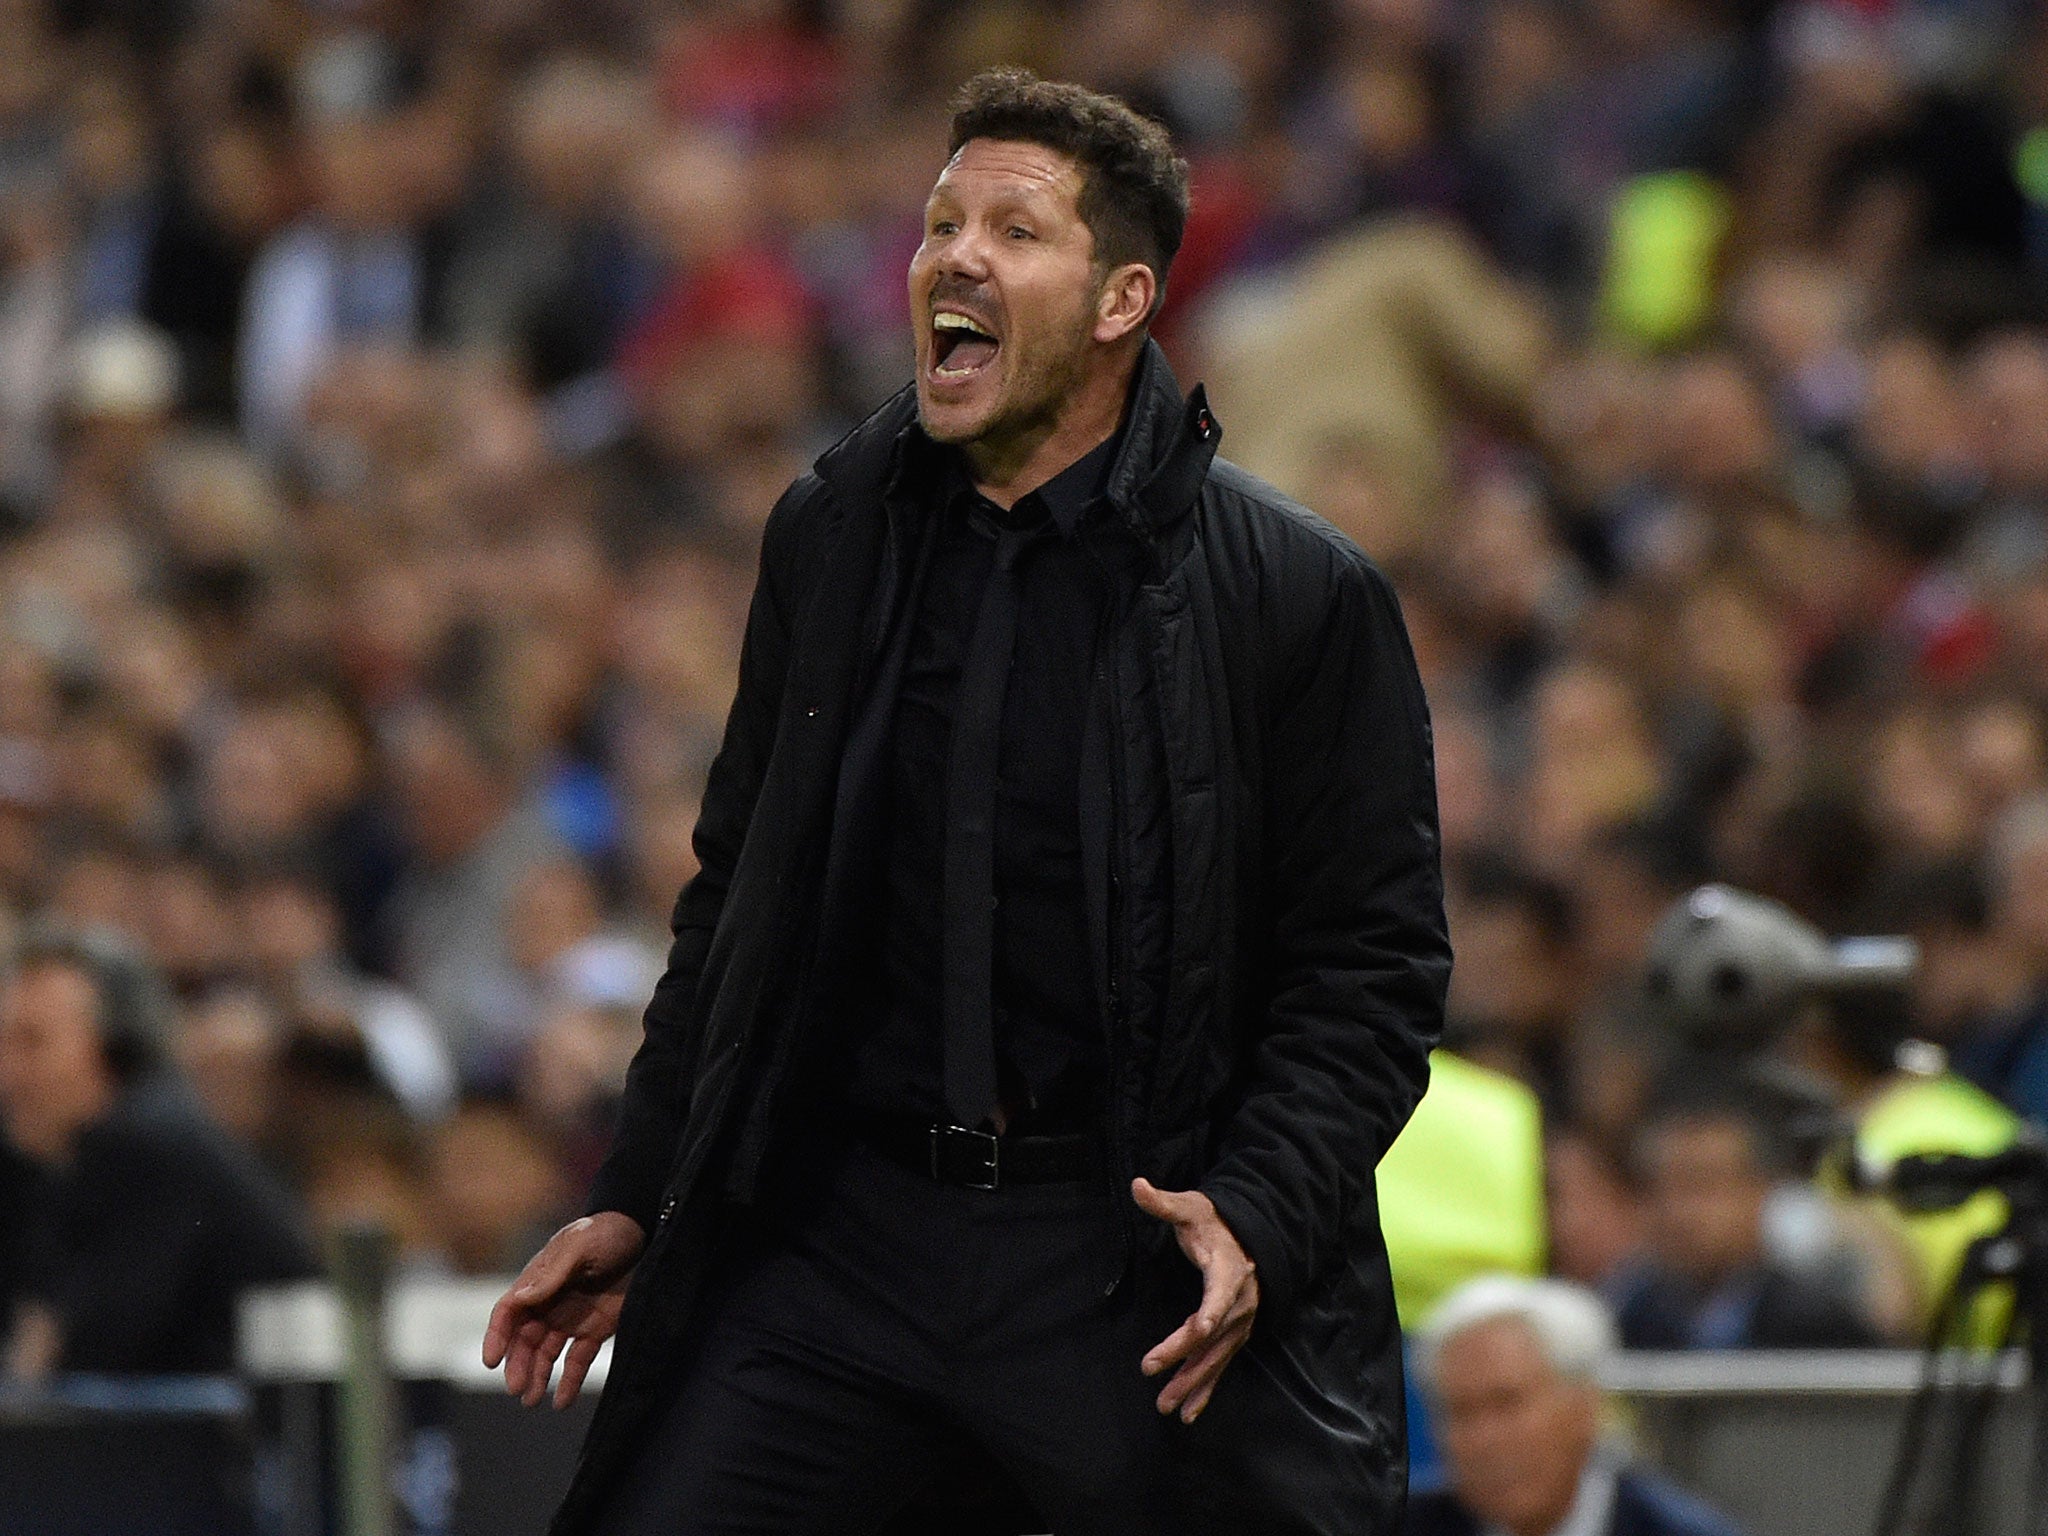 Diego Simeone left his future in limbo but looks more likely to stay at Atletico Madrid for at least another season